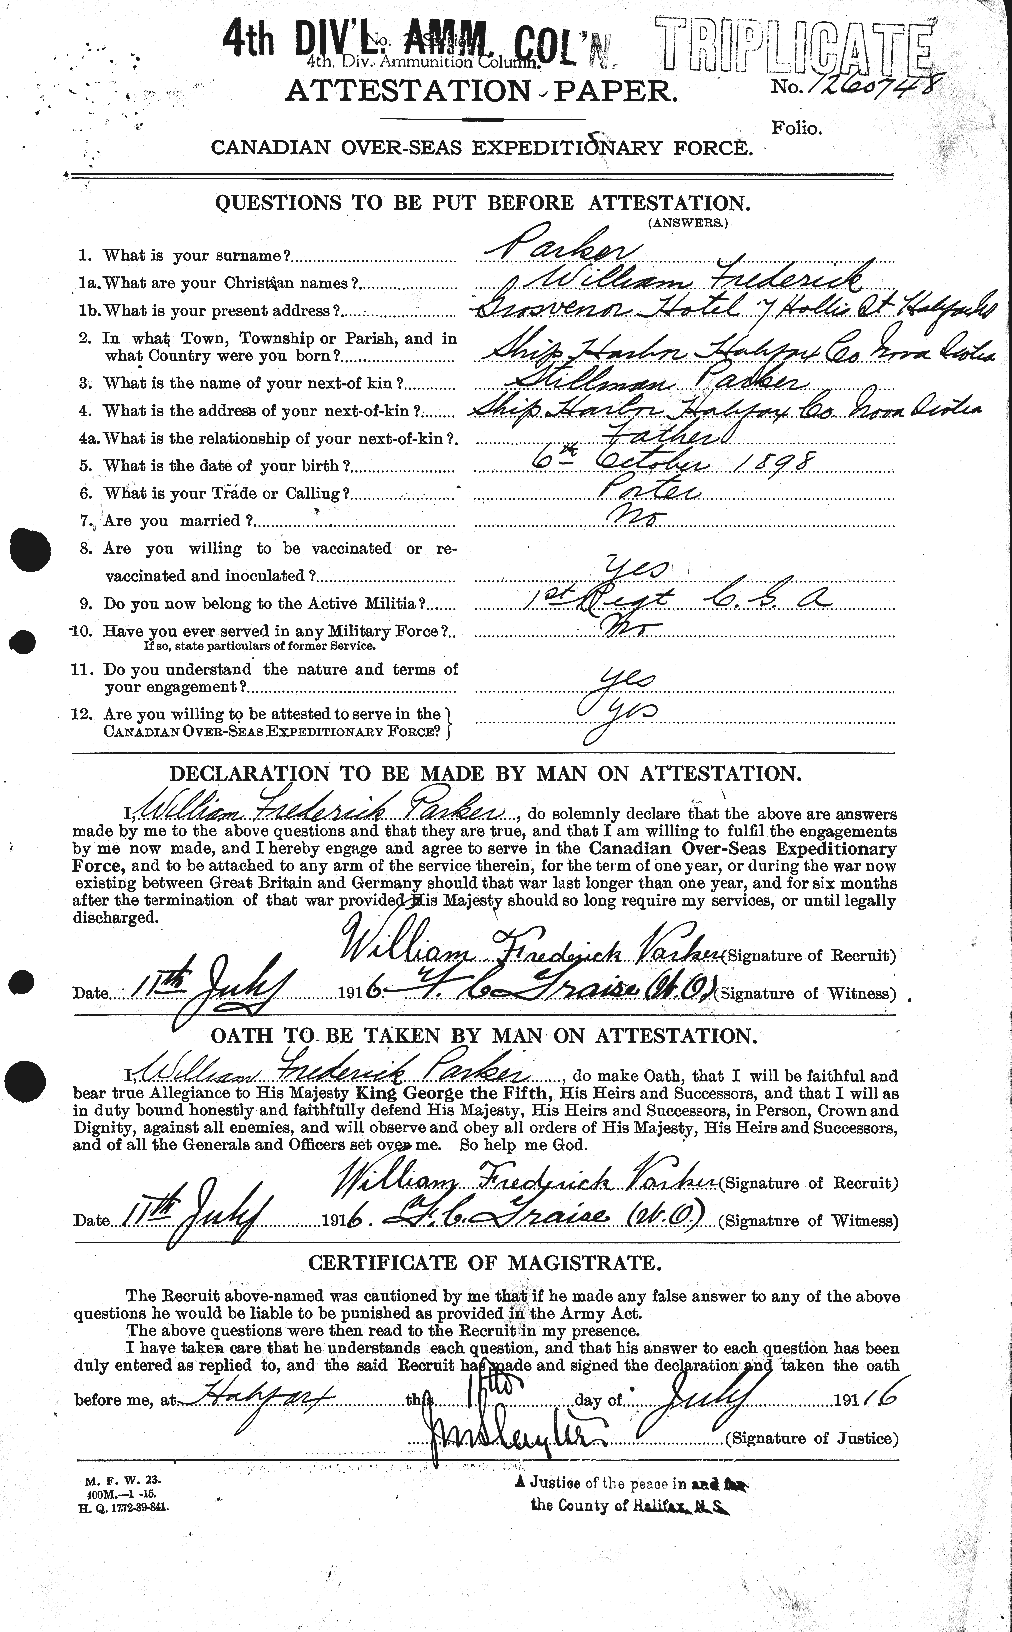 Personnel Records of the First World War - CEF 565743a